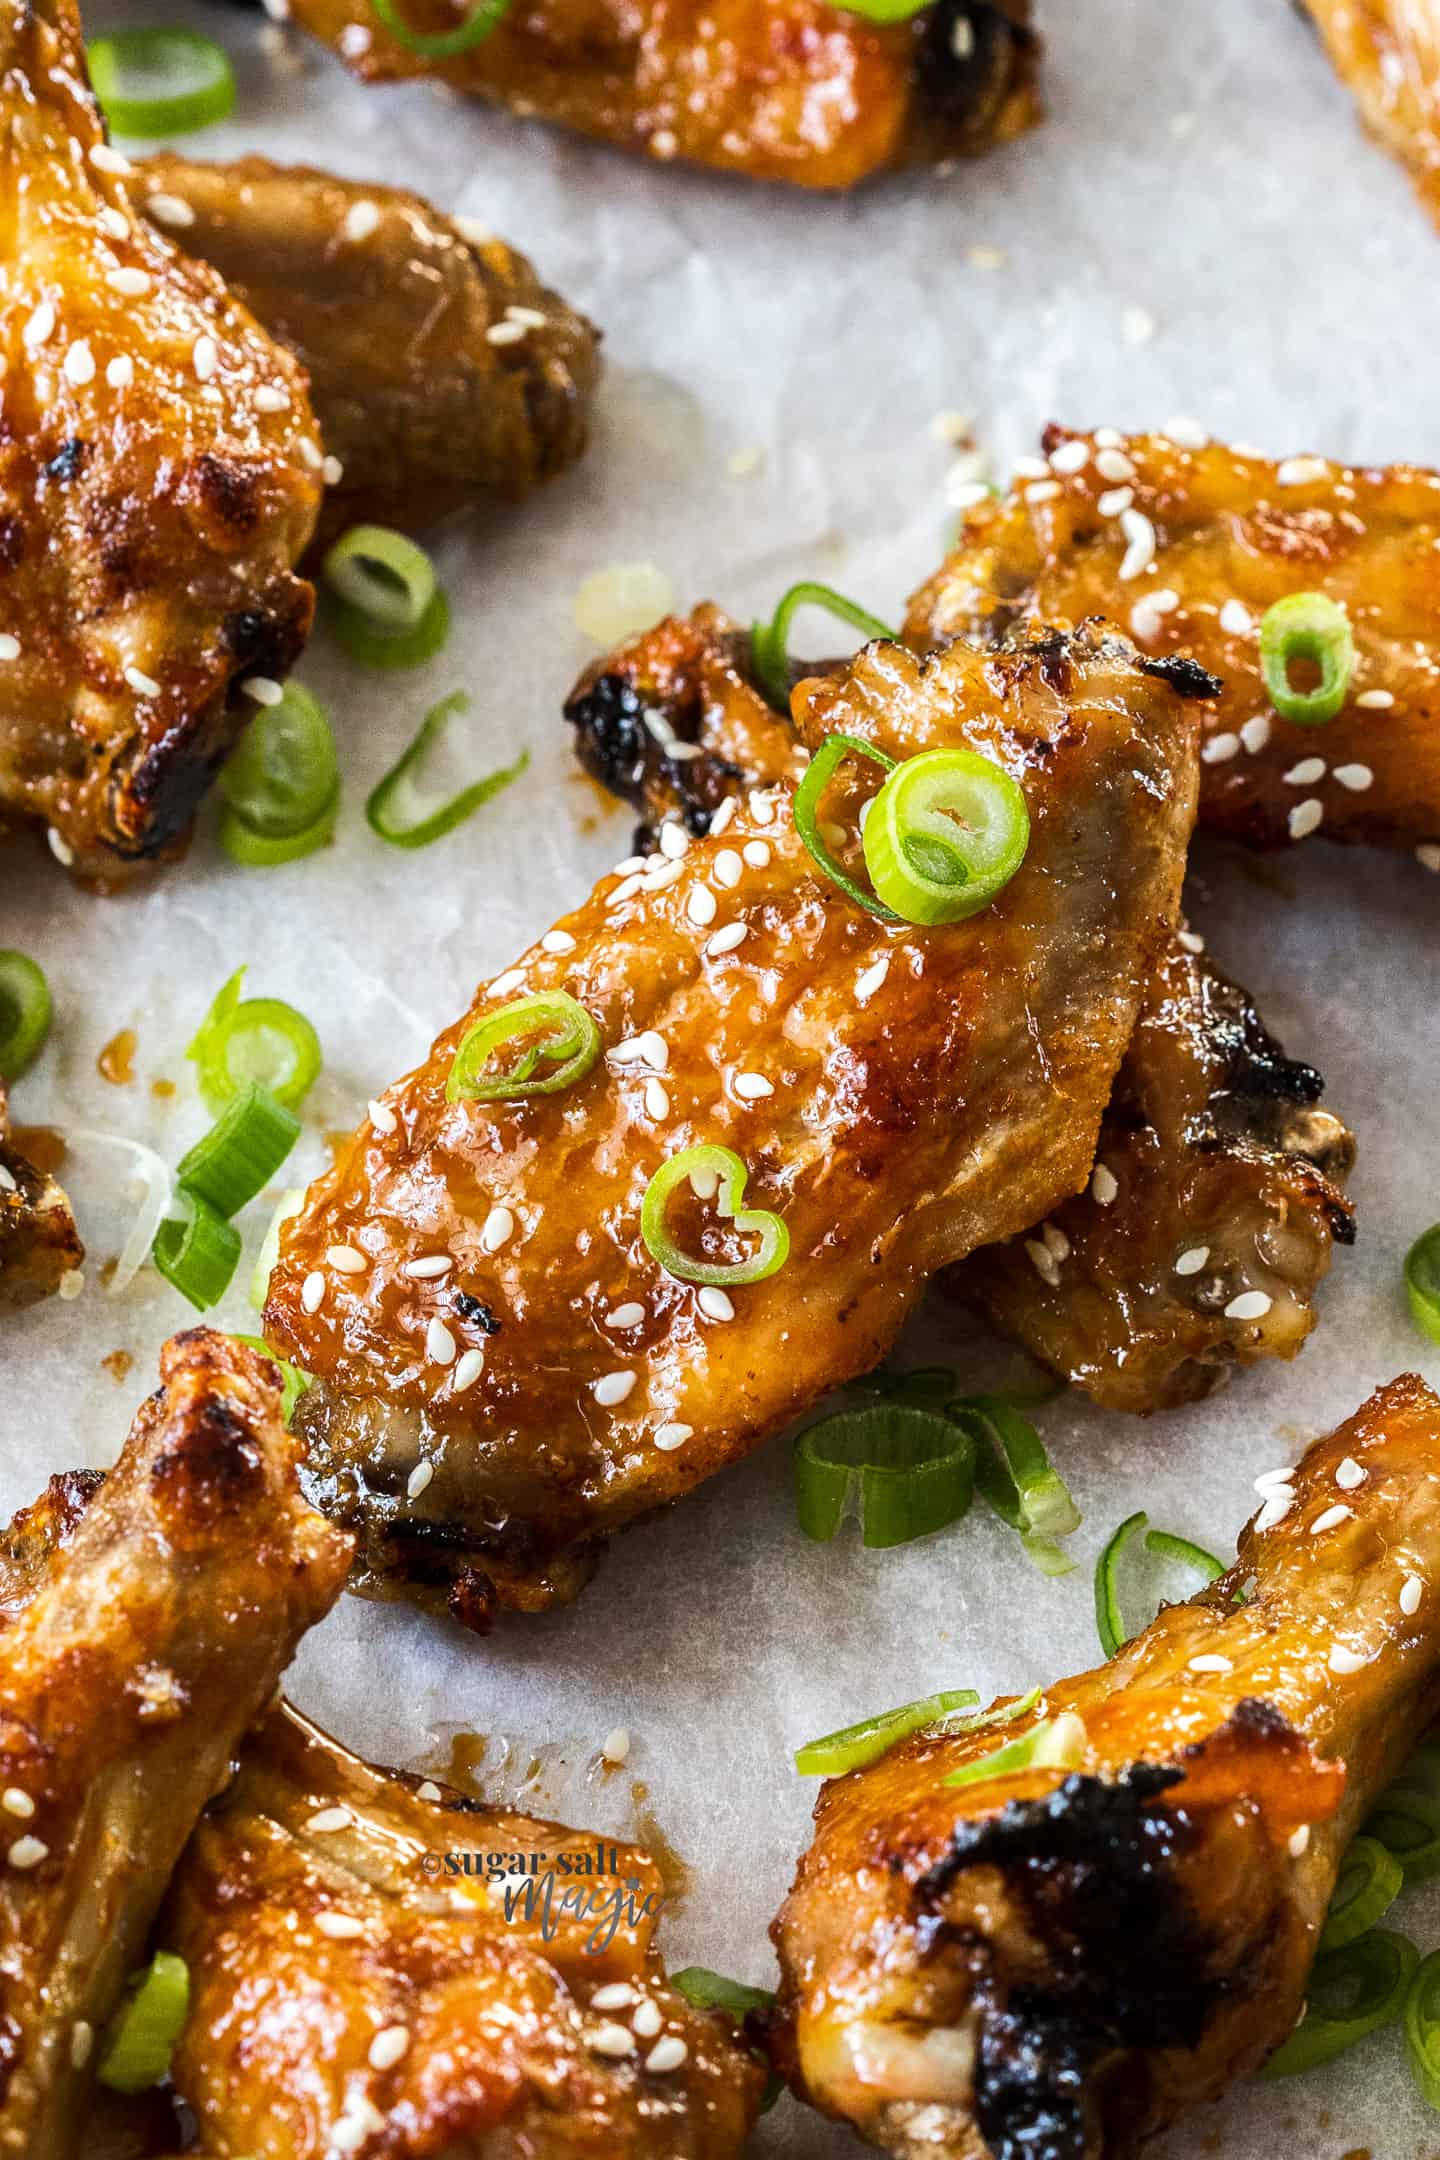 Closeup of a sticky chicken wing.